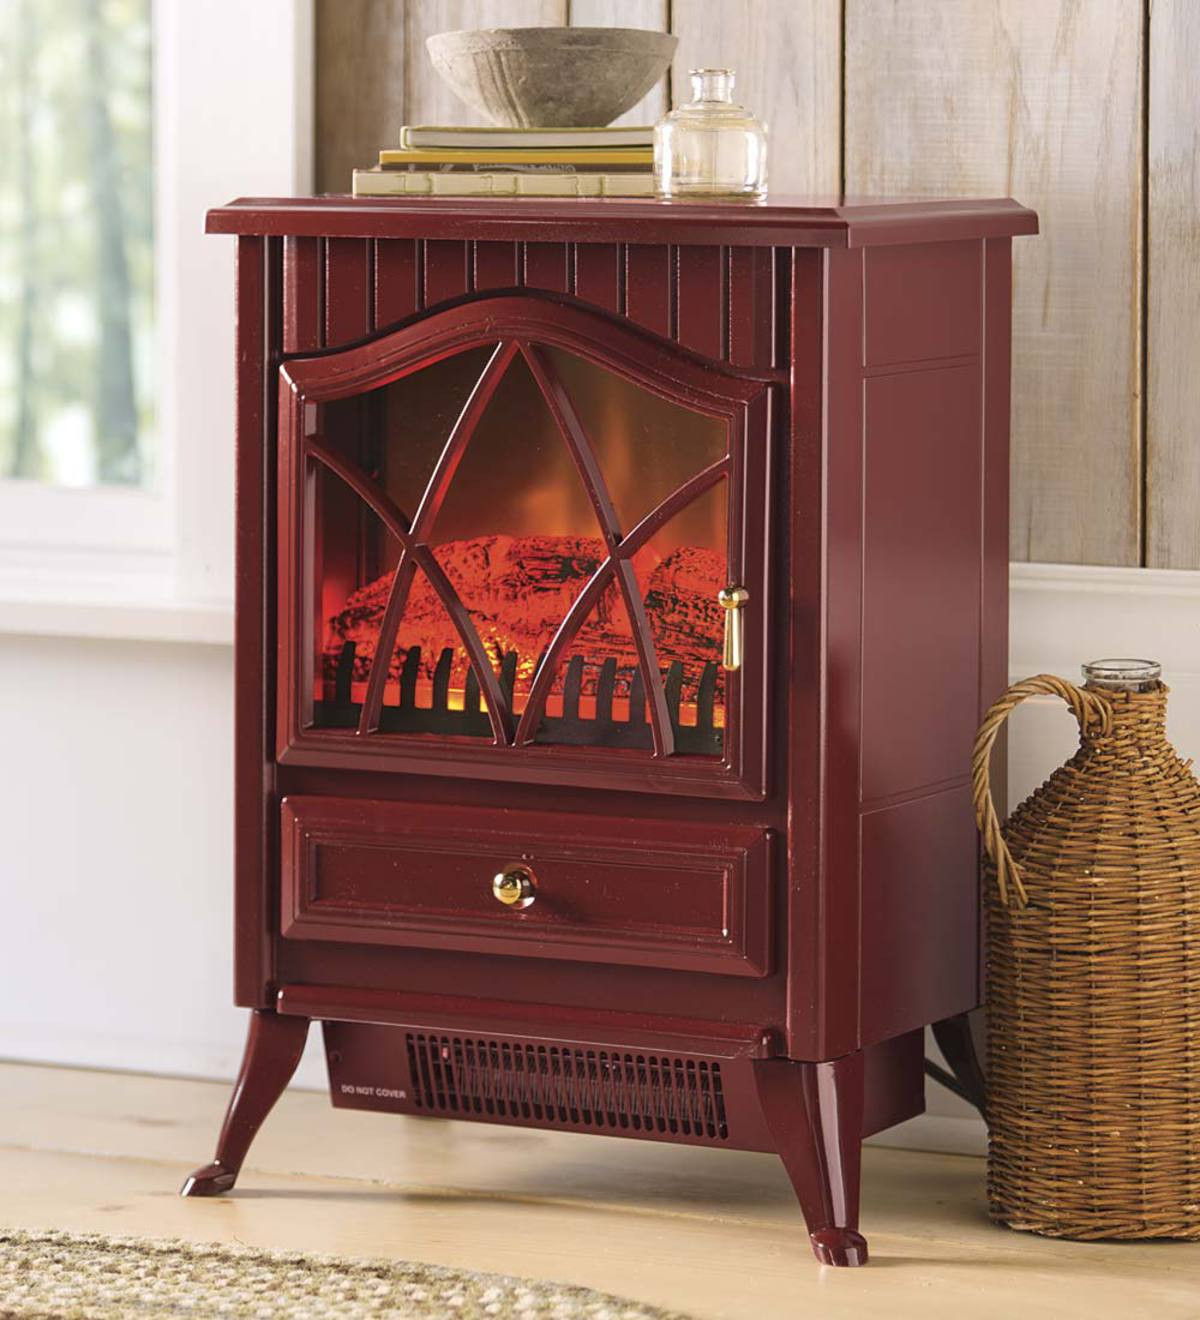 Plow And Hearth Electric Fireplace
 pact Electric Stove Black